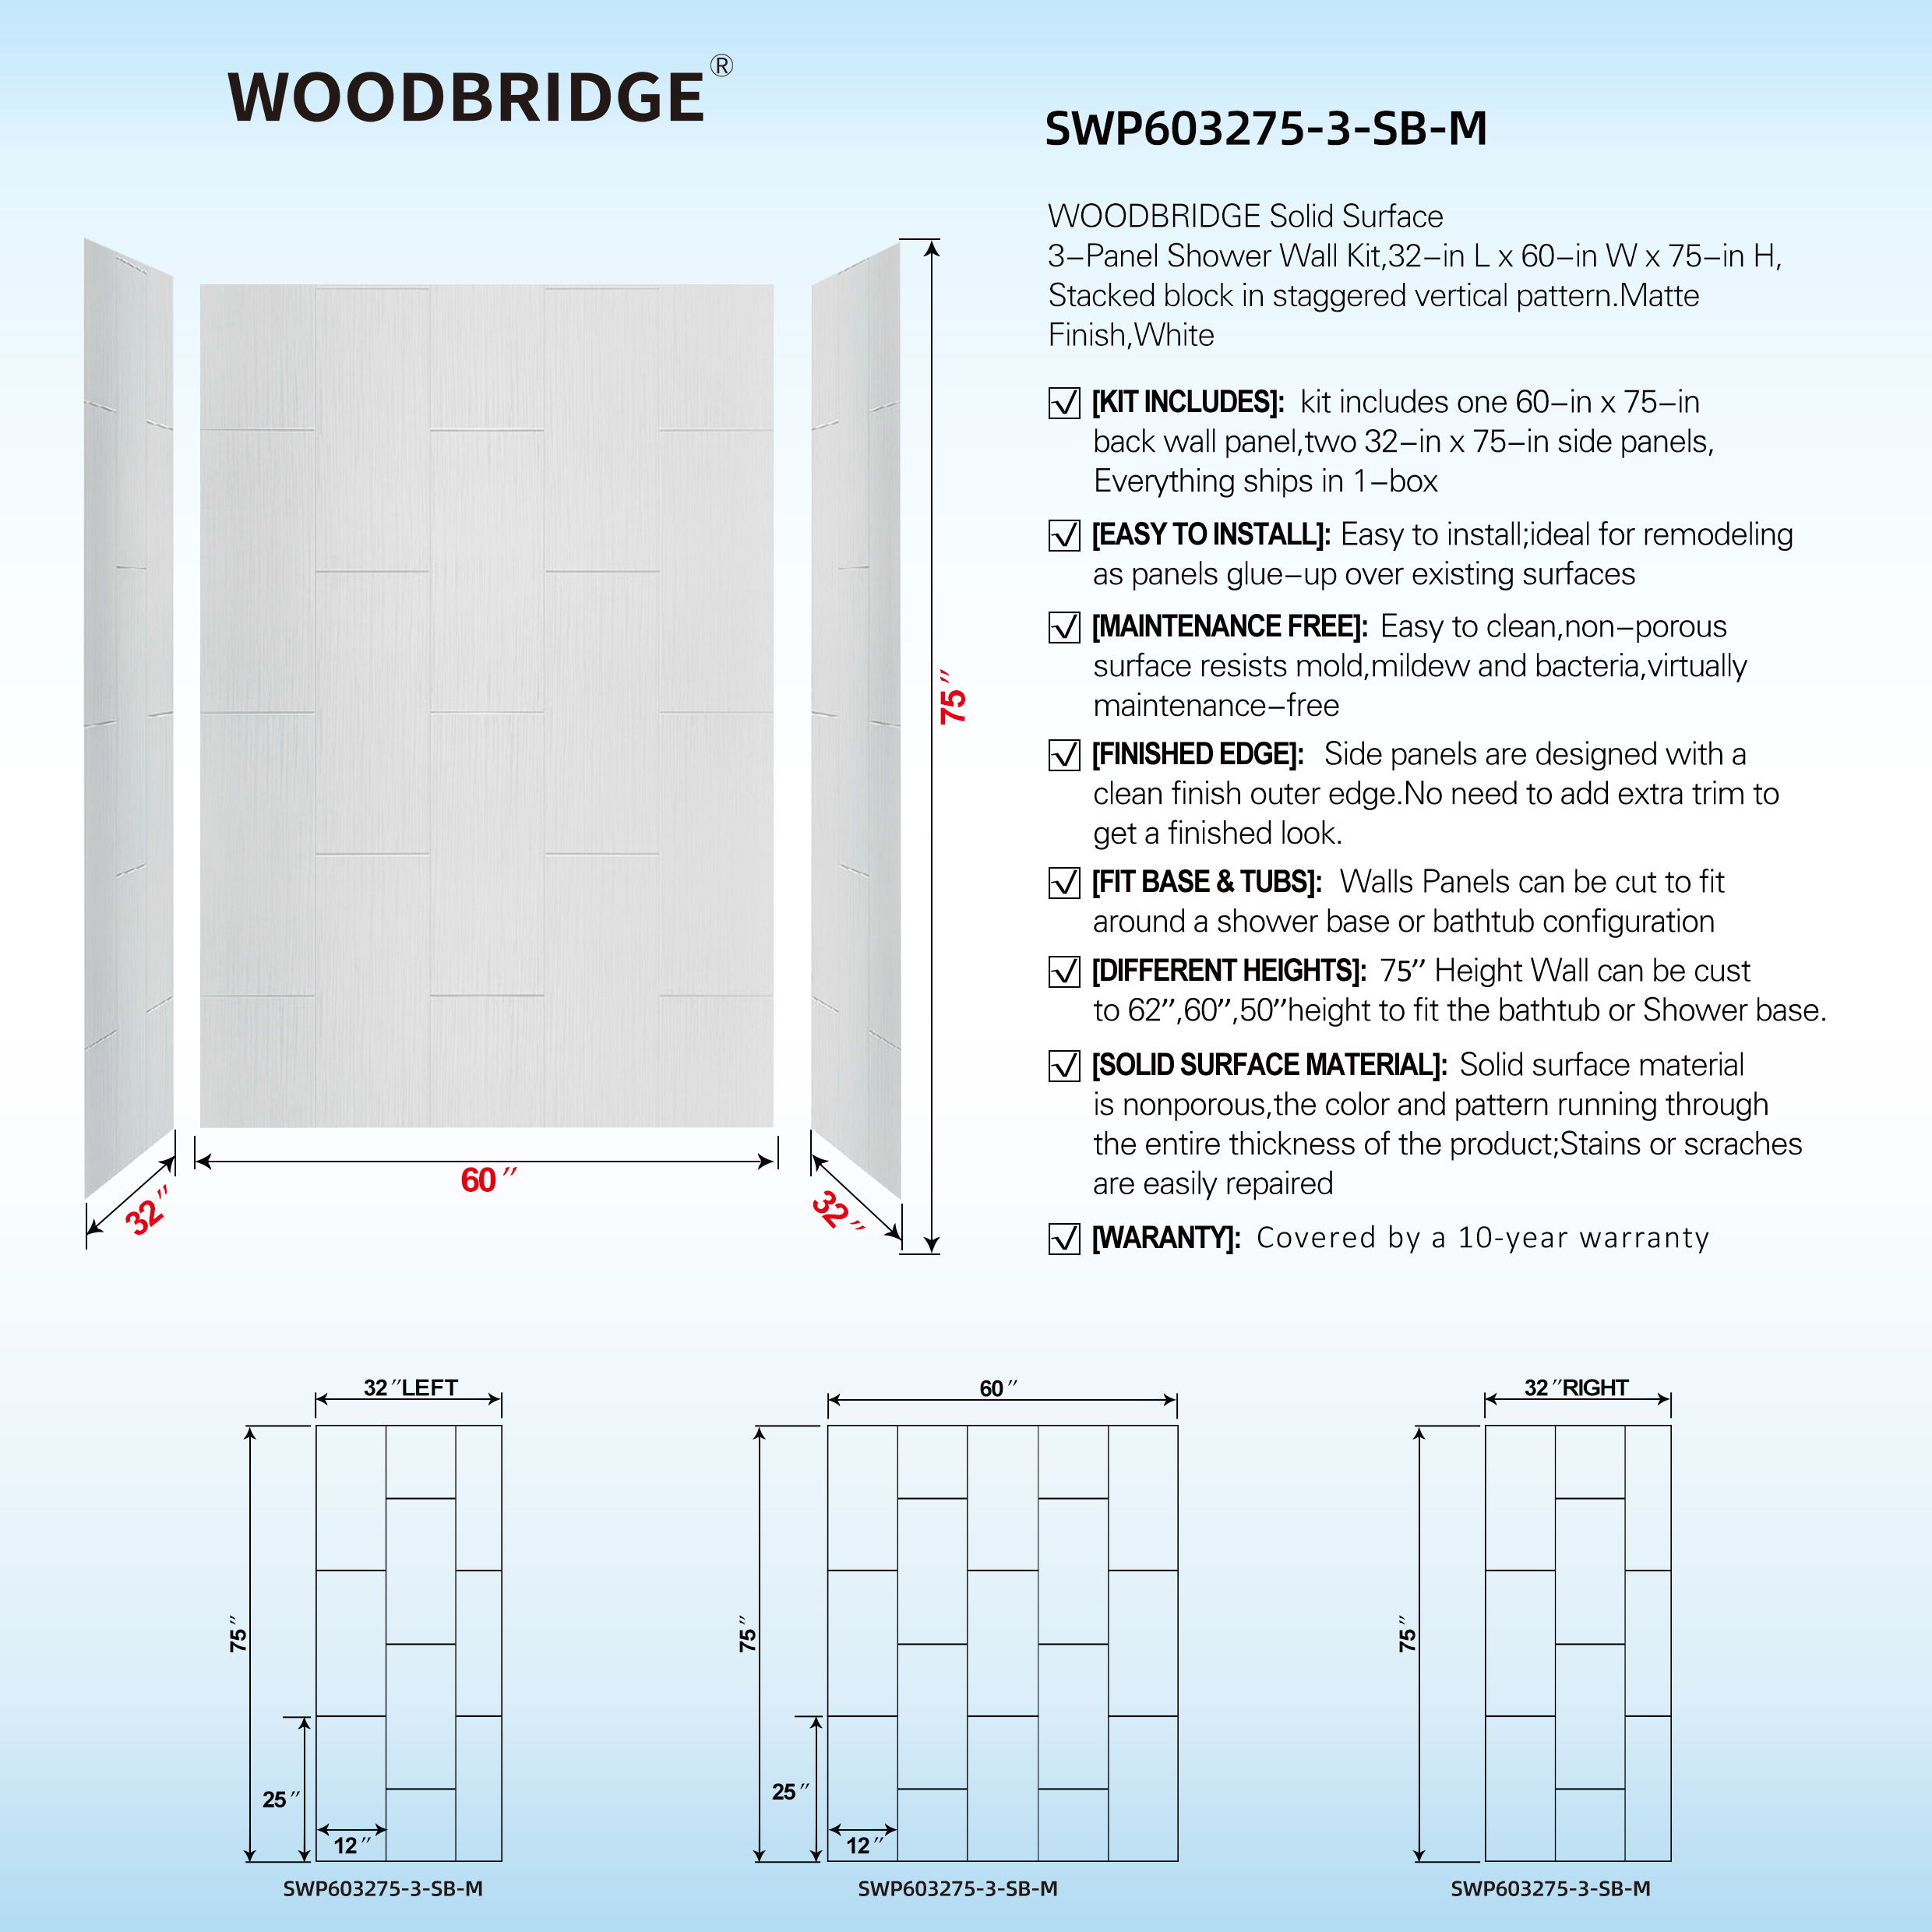  WOODBRIDGE  Solid Surface 3-Panel Shower Wall Kit, 32-in L x 60-in W x 75-in H, Stacked block in a staggered vertical pattern.  Matte Finish, White_11715